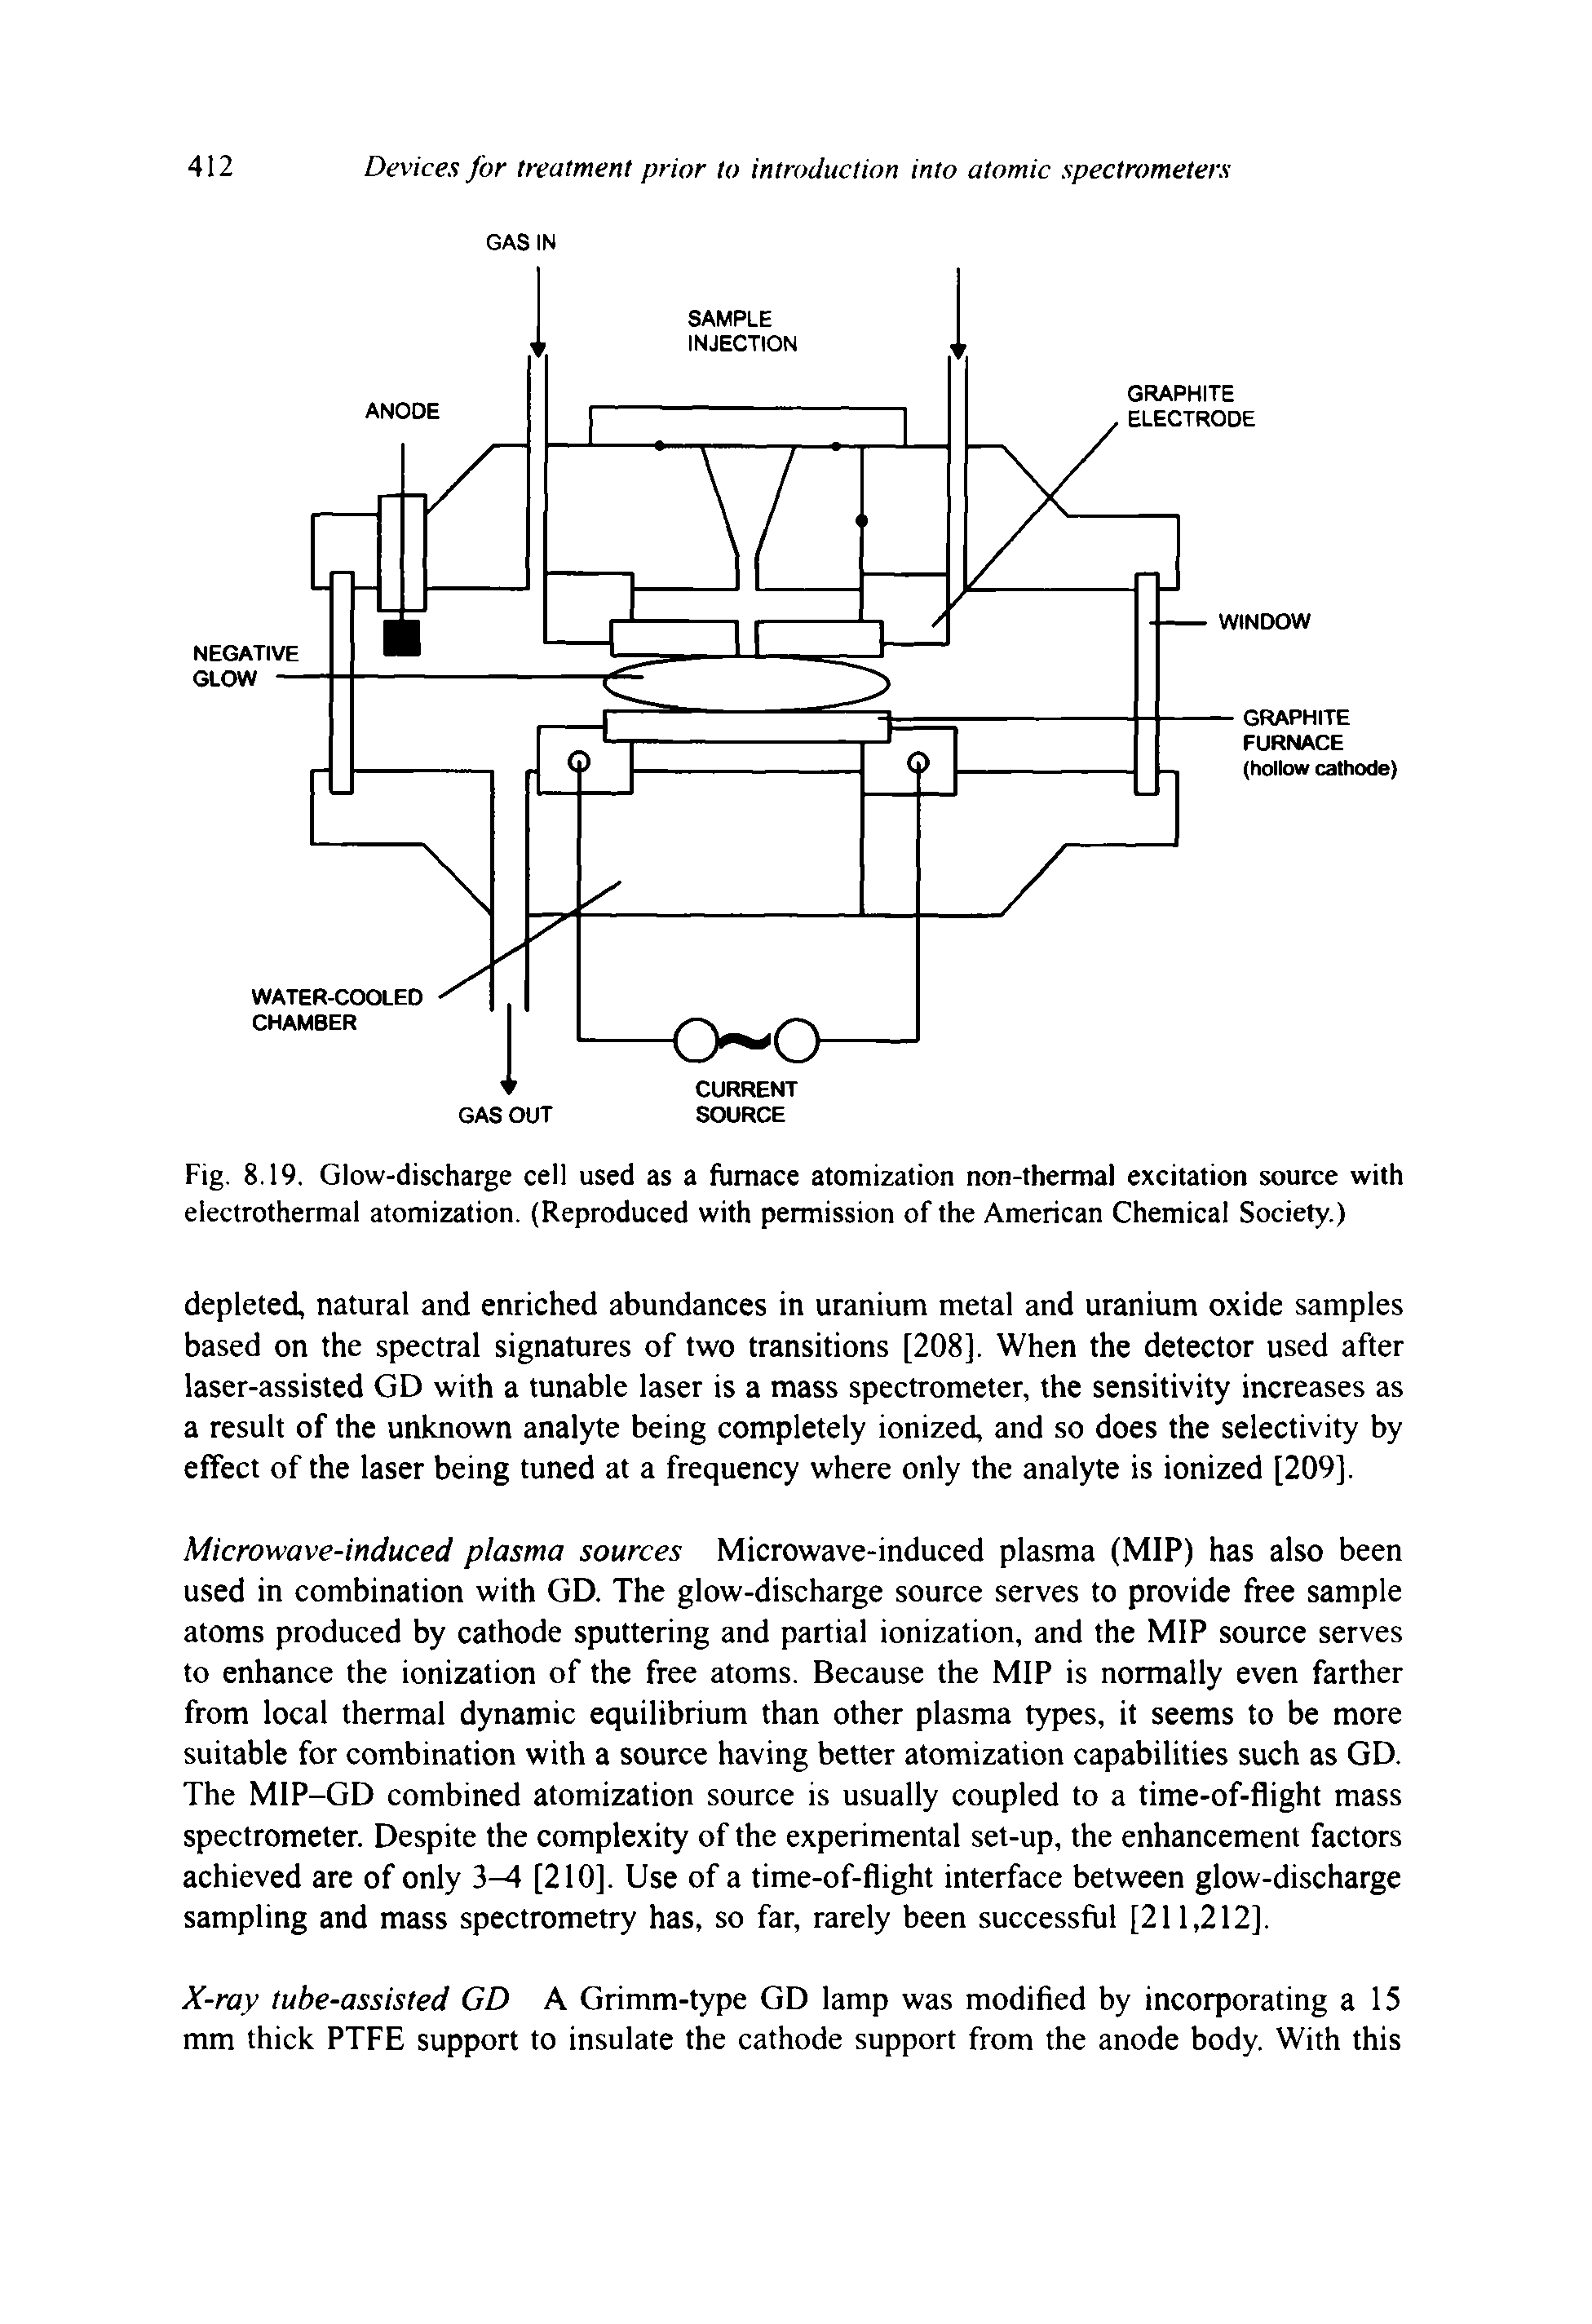 Fig. 8.19. Glow-discharge cell used as a furnace atomization non-thermal excitation source with electrothermal atomization. (Reproduced with permission of the American Chemical Society.)...